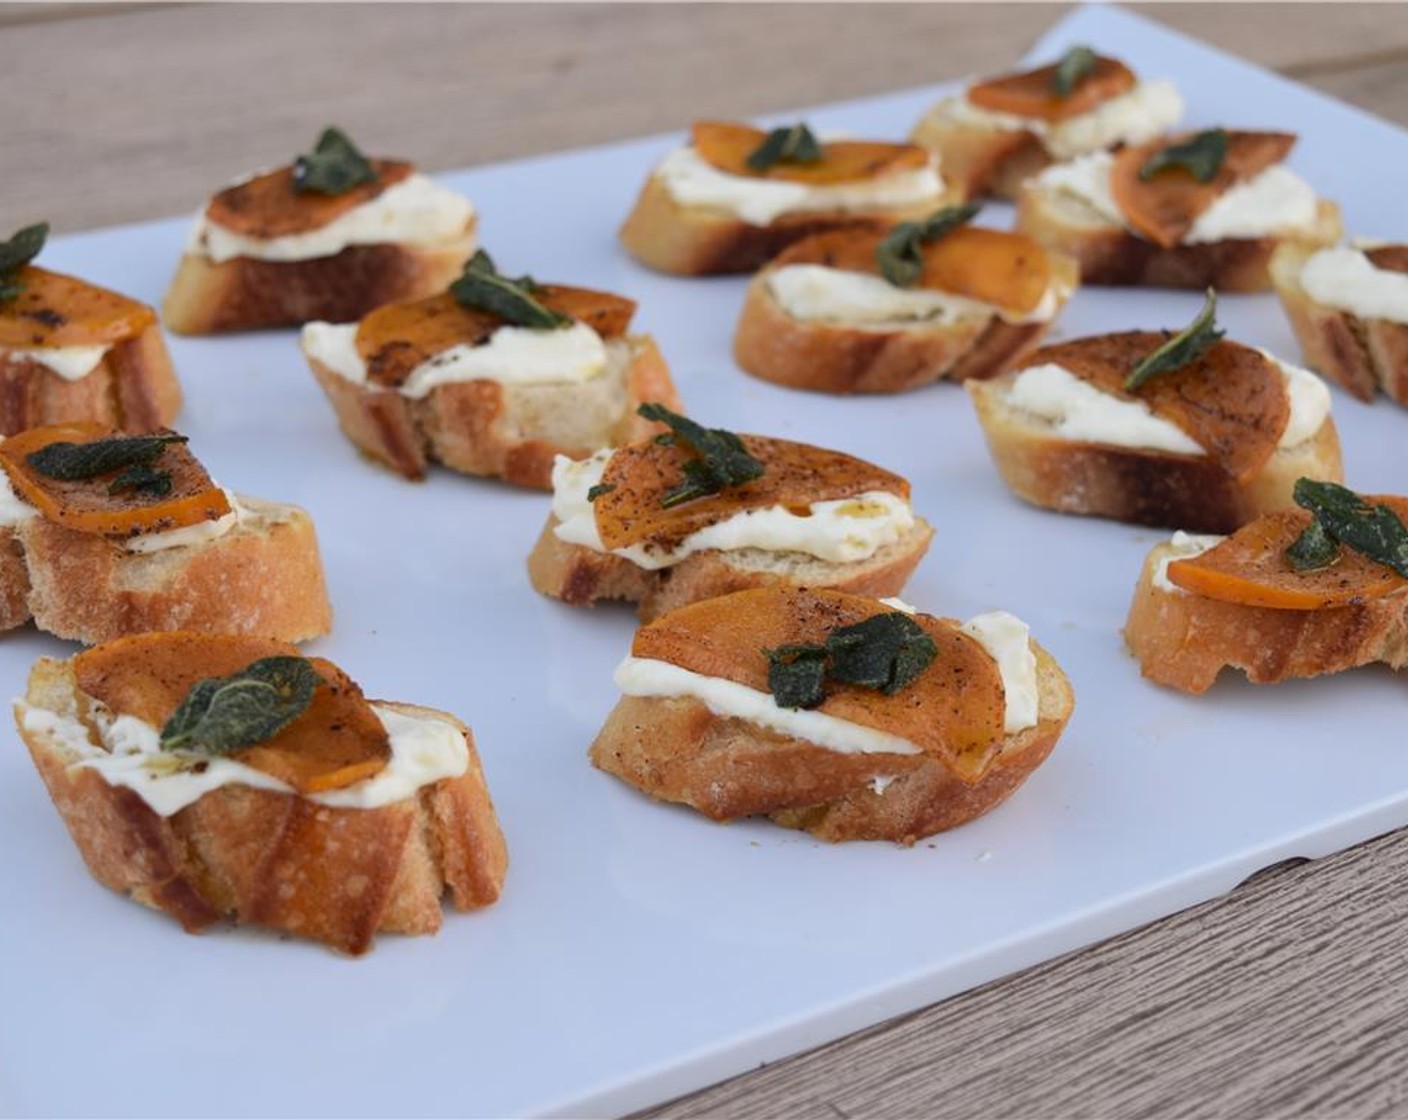 step 9 Spread a dollop of whipped ricotta on each crostini, layer on a slice or two of persimmon, drizzle with a small bit of extra butter, and top with a crisped sage leaf. Serve and enjoy!